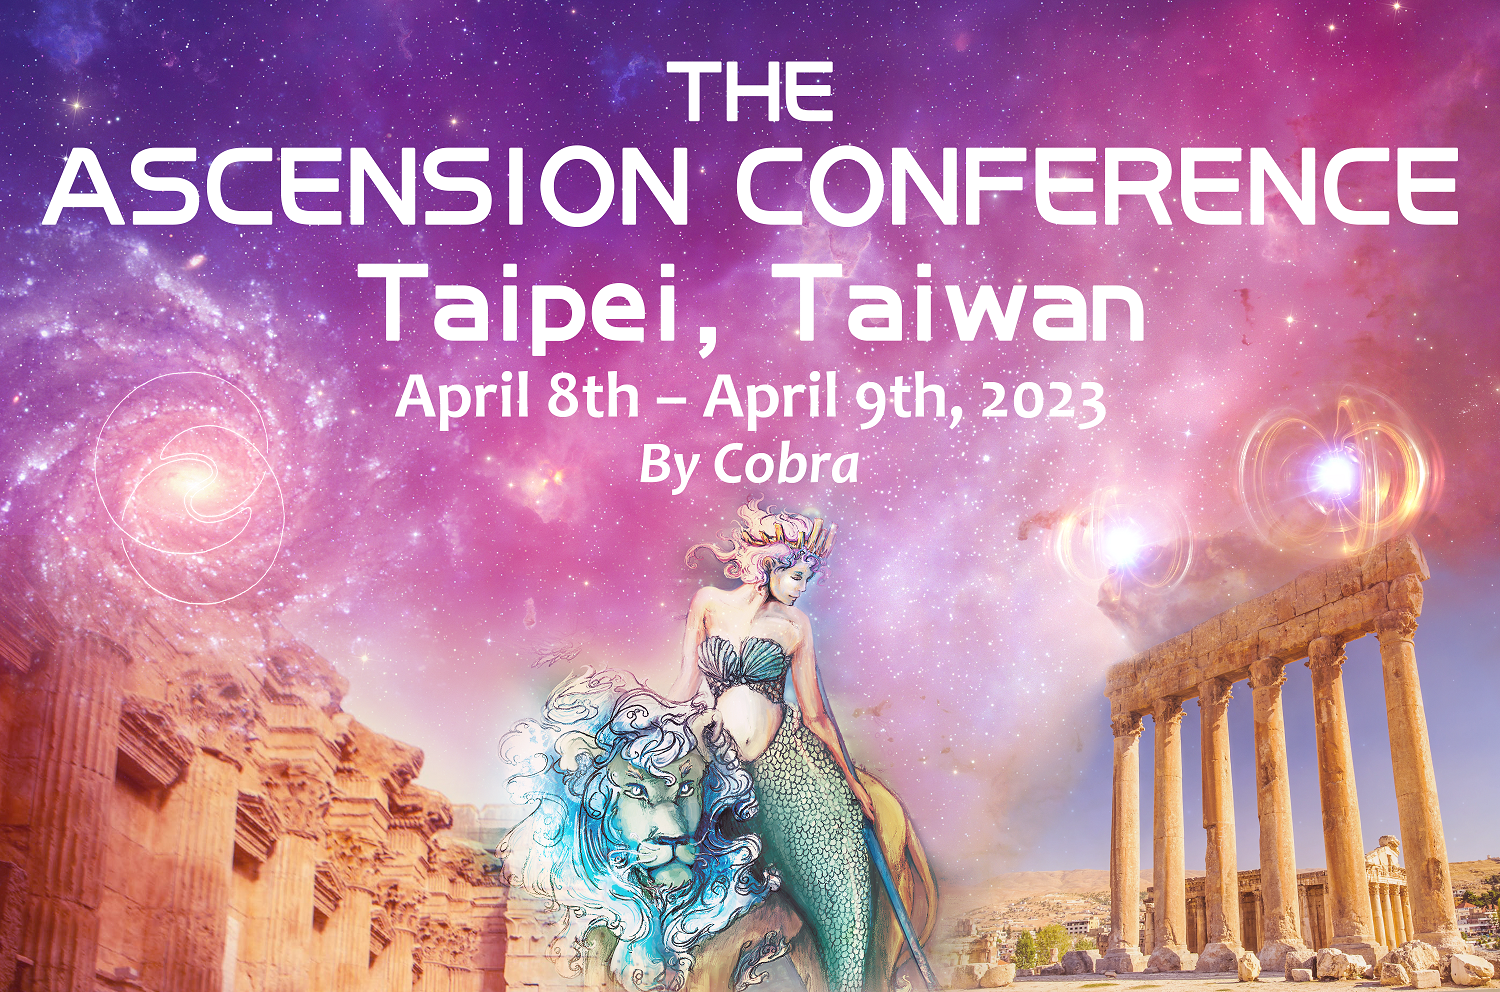 2023 THE ASCENSION CONFERENCE